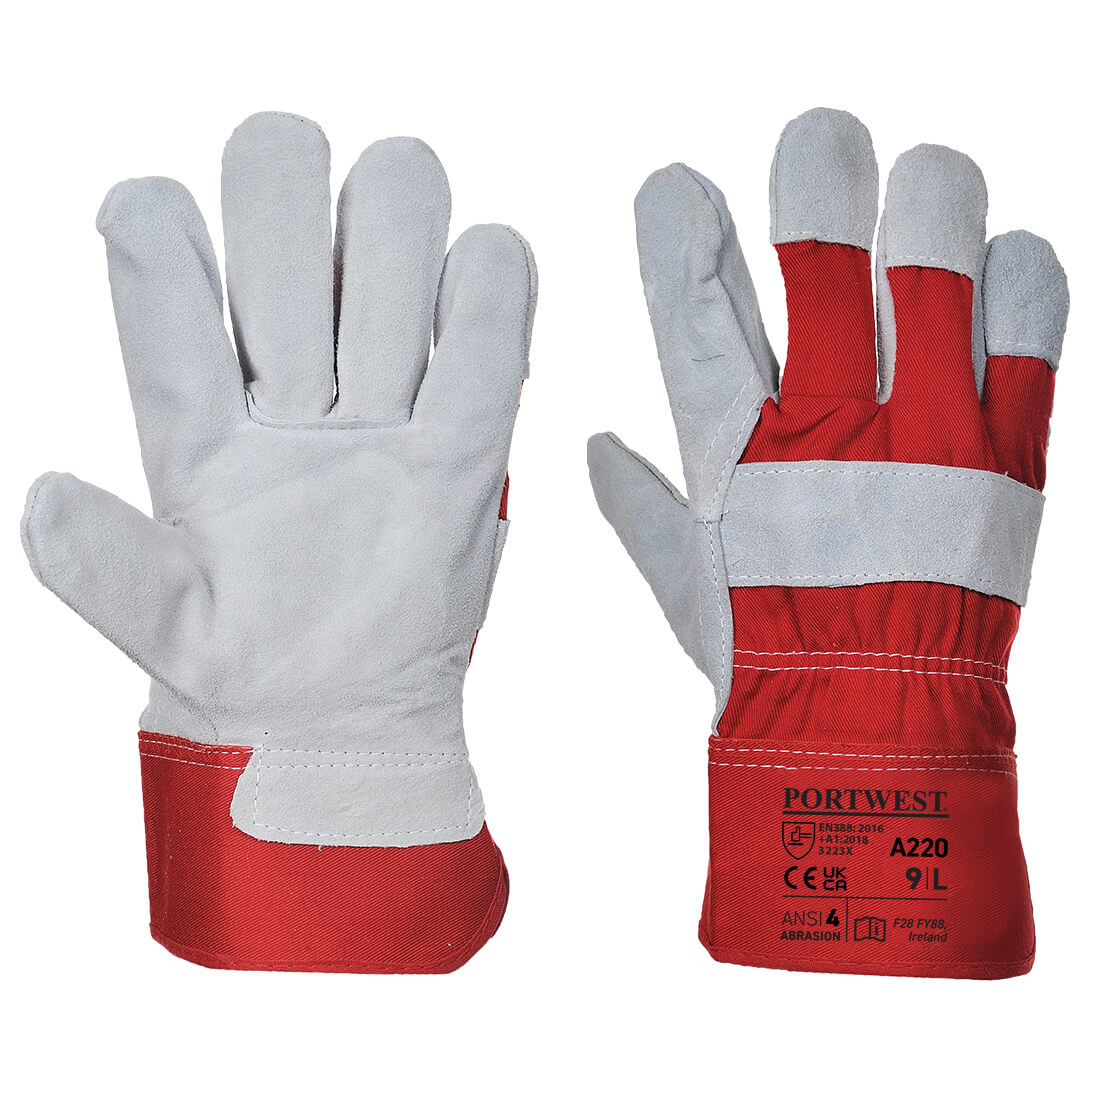 Portwest A220 Premium Chrome Rigger Glove for Drivers & Riggers